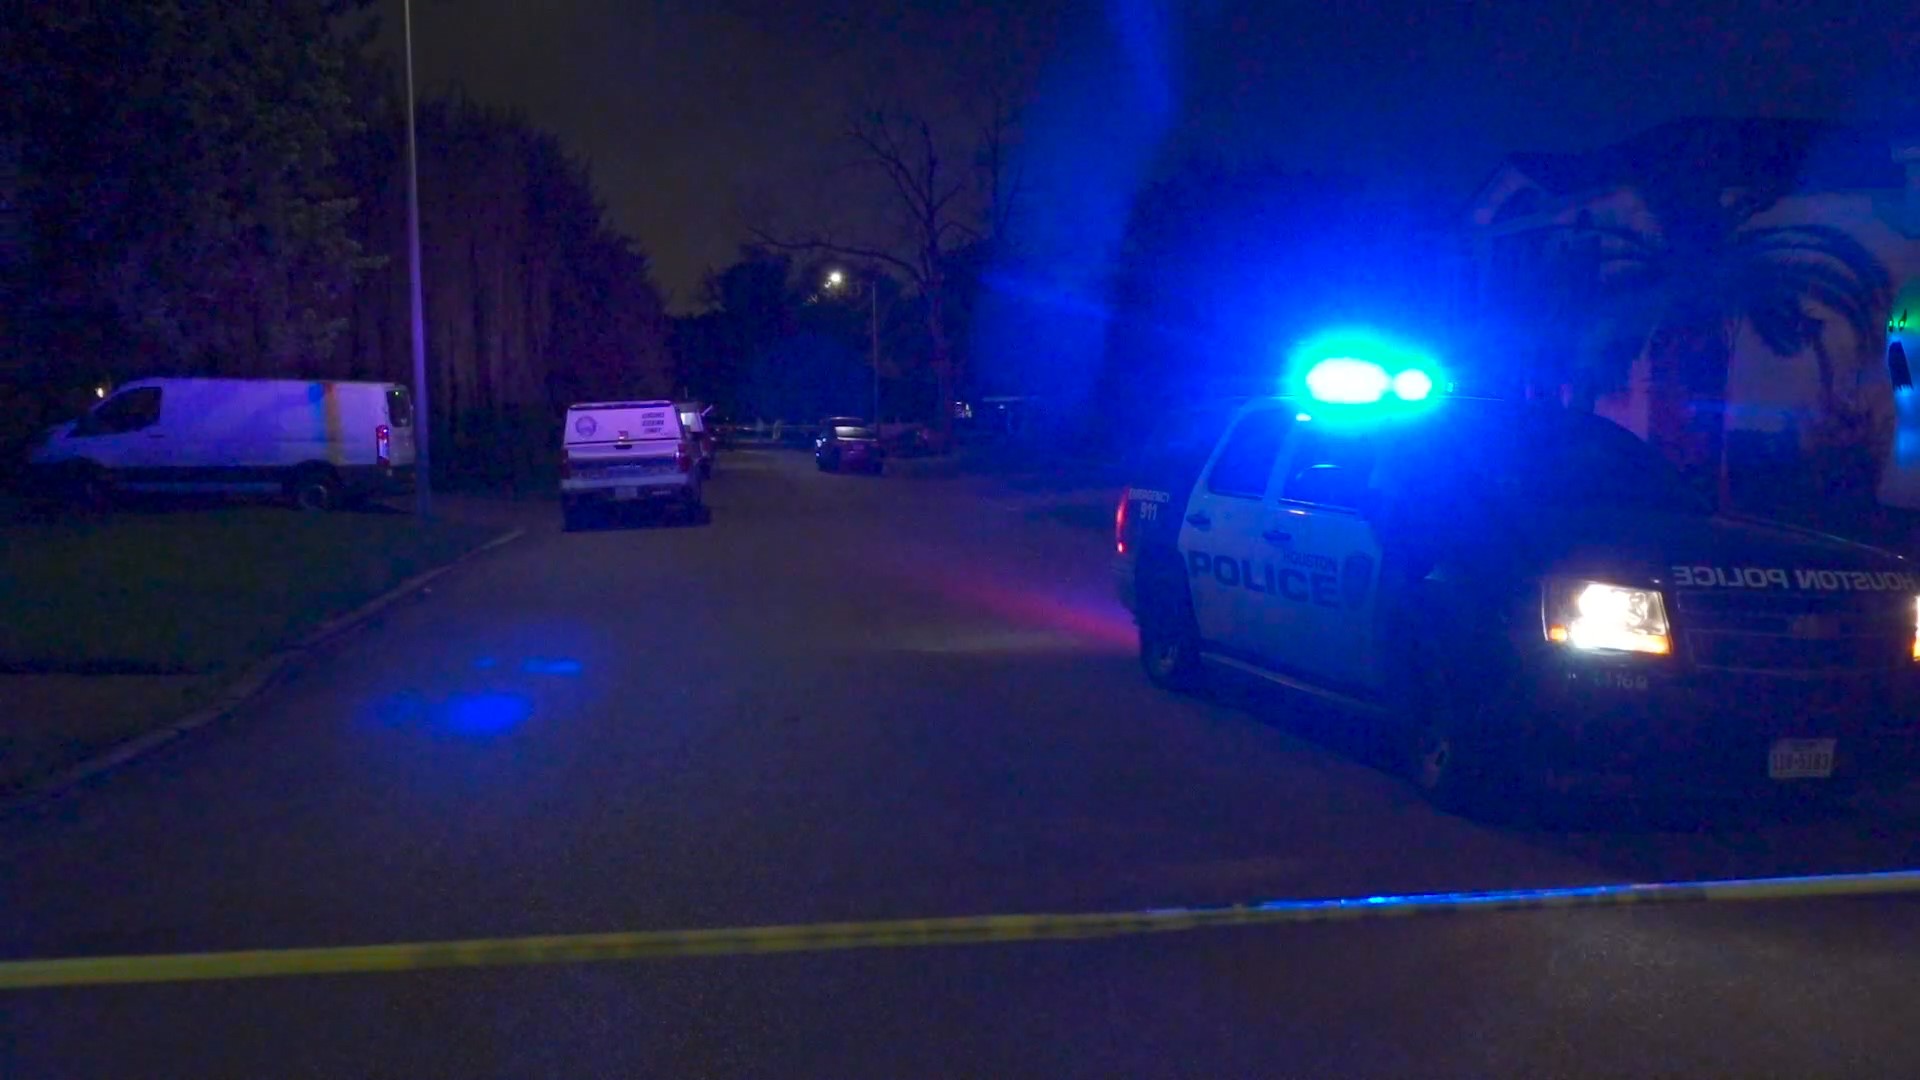 A 50-year-old man was found shot to death after his Ford Mustang ended up in a front yard of a home in southeast Houston early Friday, according to Houston police.